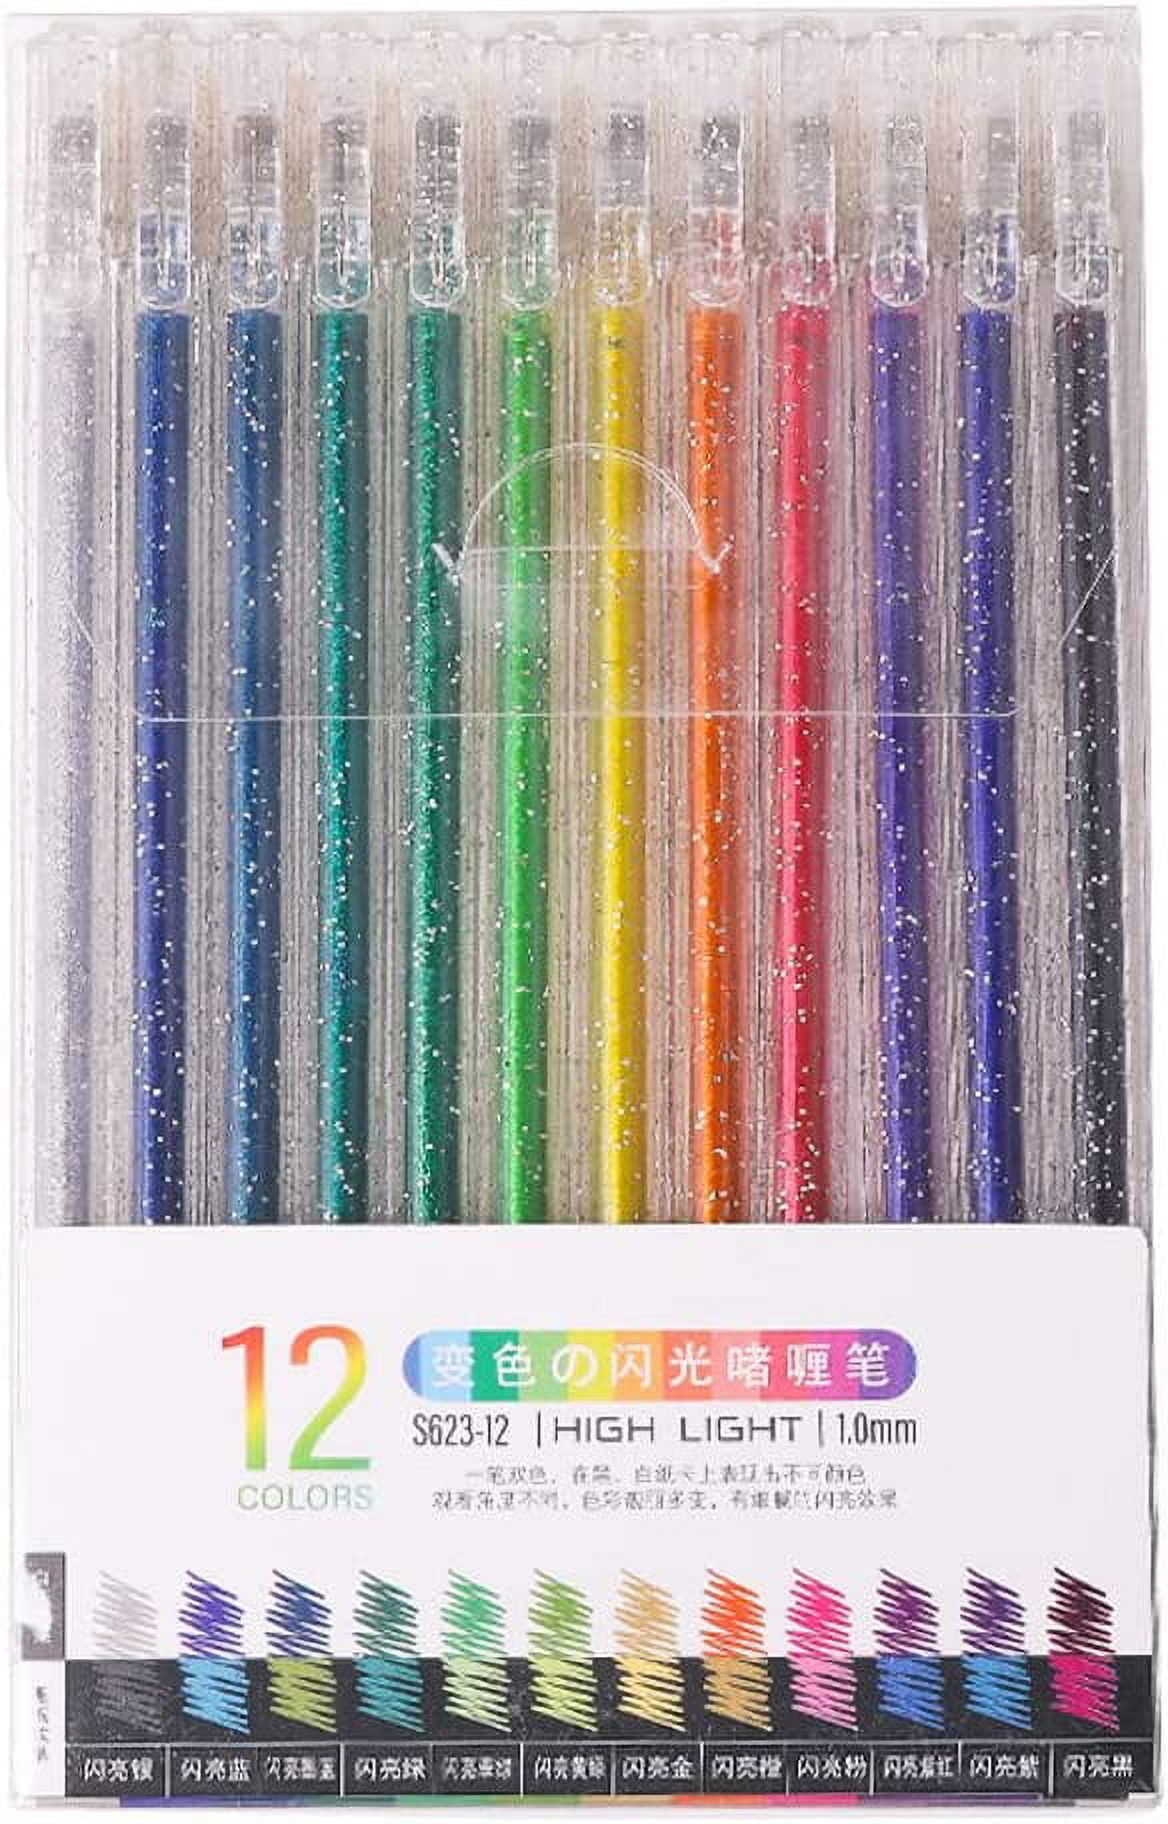 Pikadingnis Glitter Gel Pens, Set of 12, Multicolor Pens for Arts and  Crafts, Sparkle Double Color Art Gel Pen Kit for Greeting Cards, Art  Drawing, 1mm Thin Tip Colorful Marker Pen for